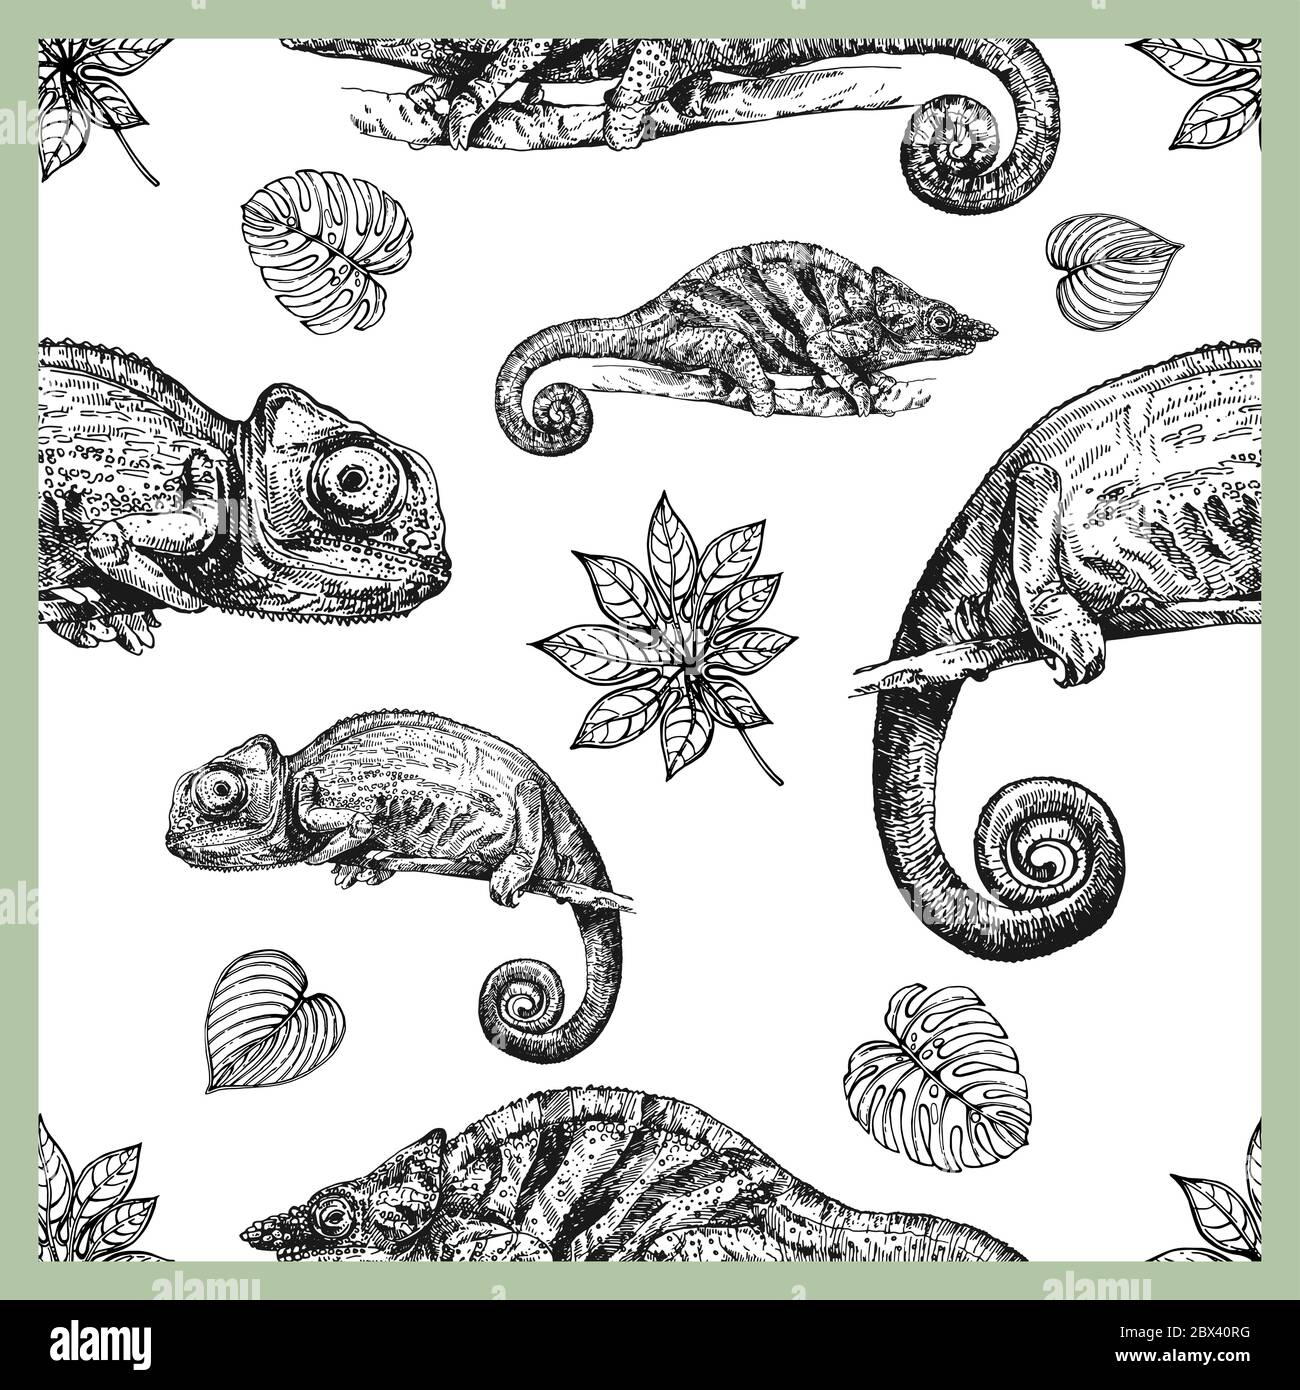 Seamless pattern of hand drawn sketch style chameleons and plants isolated on white background. Vector illustration. Stock Vector